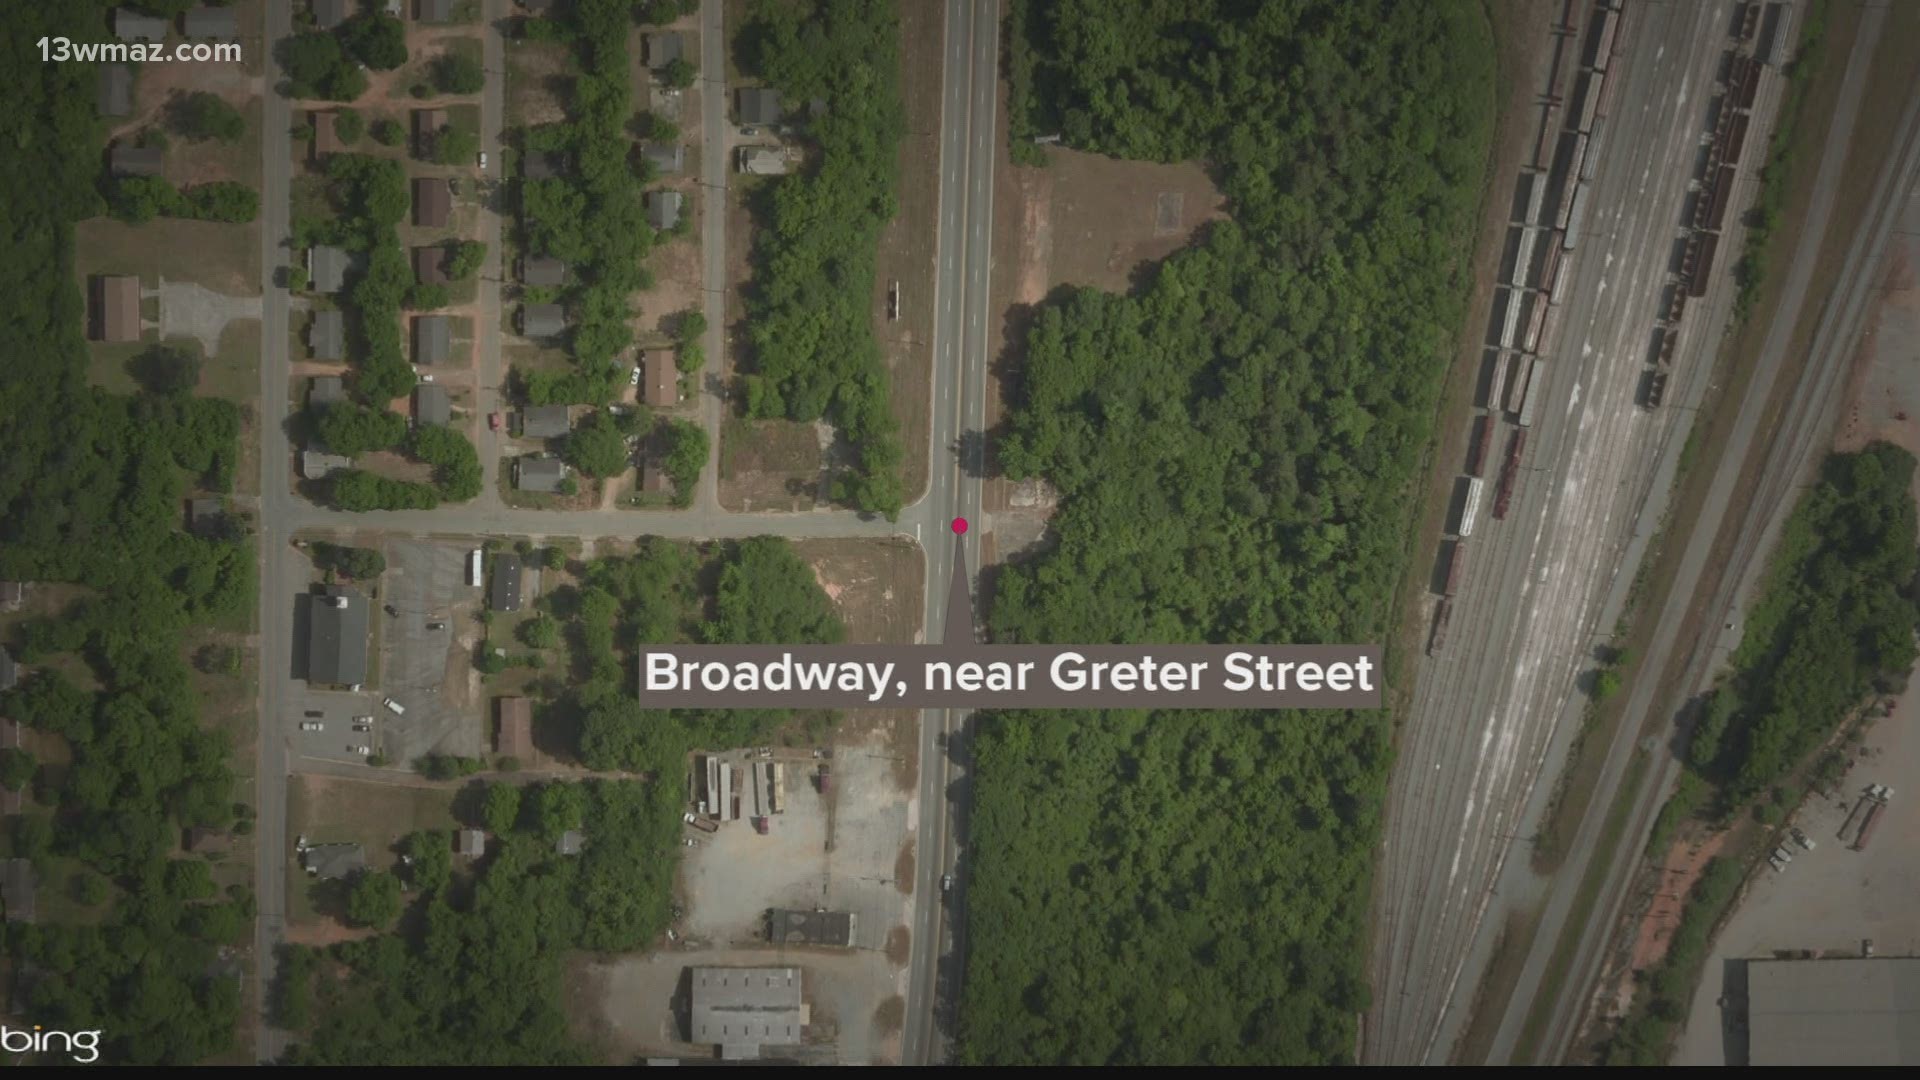 The group was hit on Broadway near Greter Street.